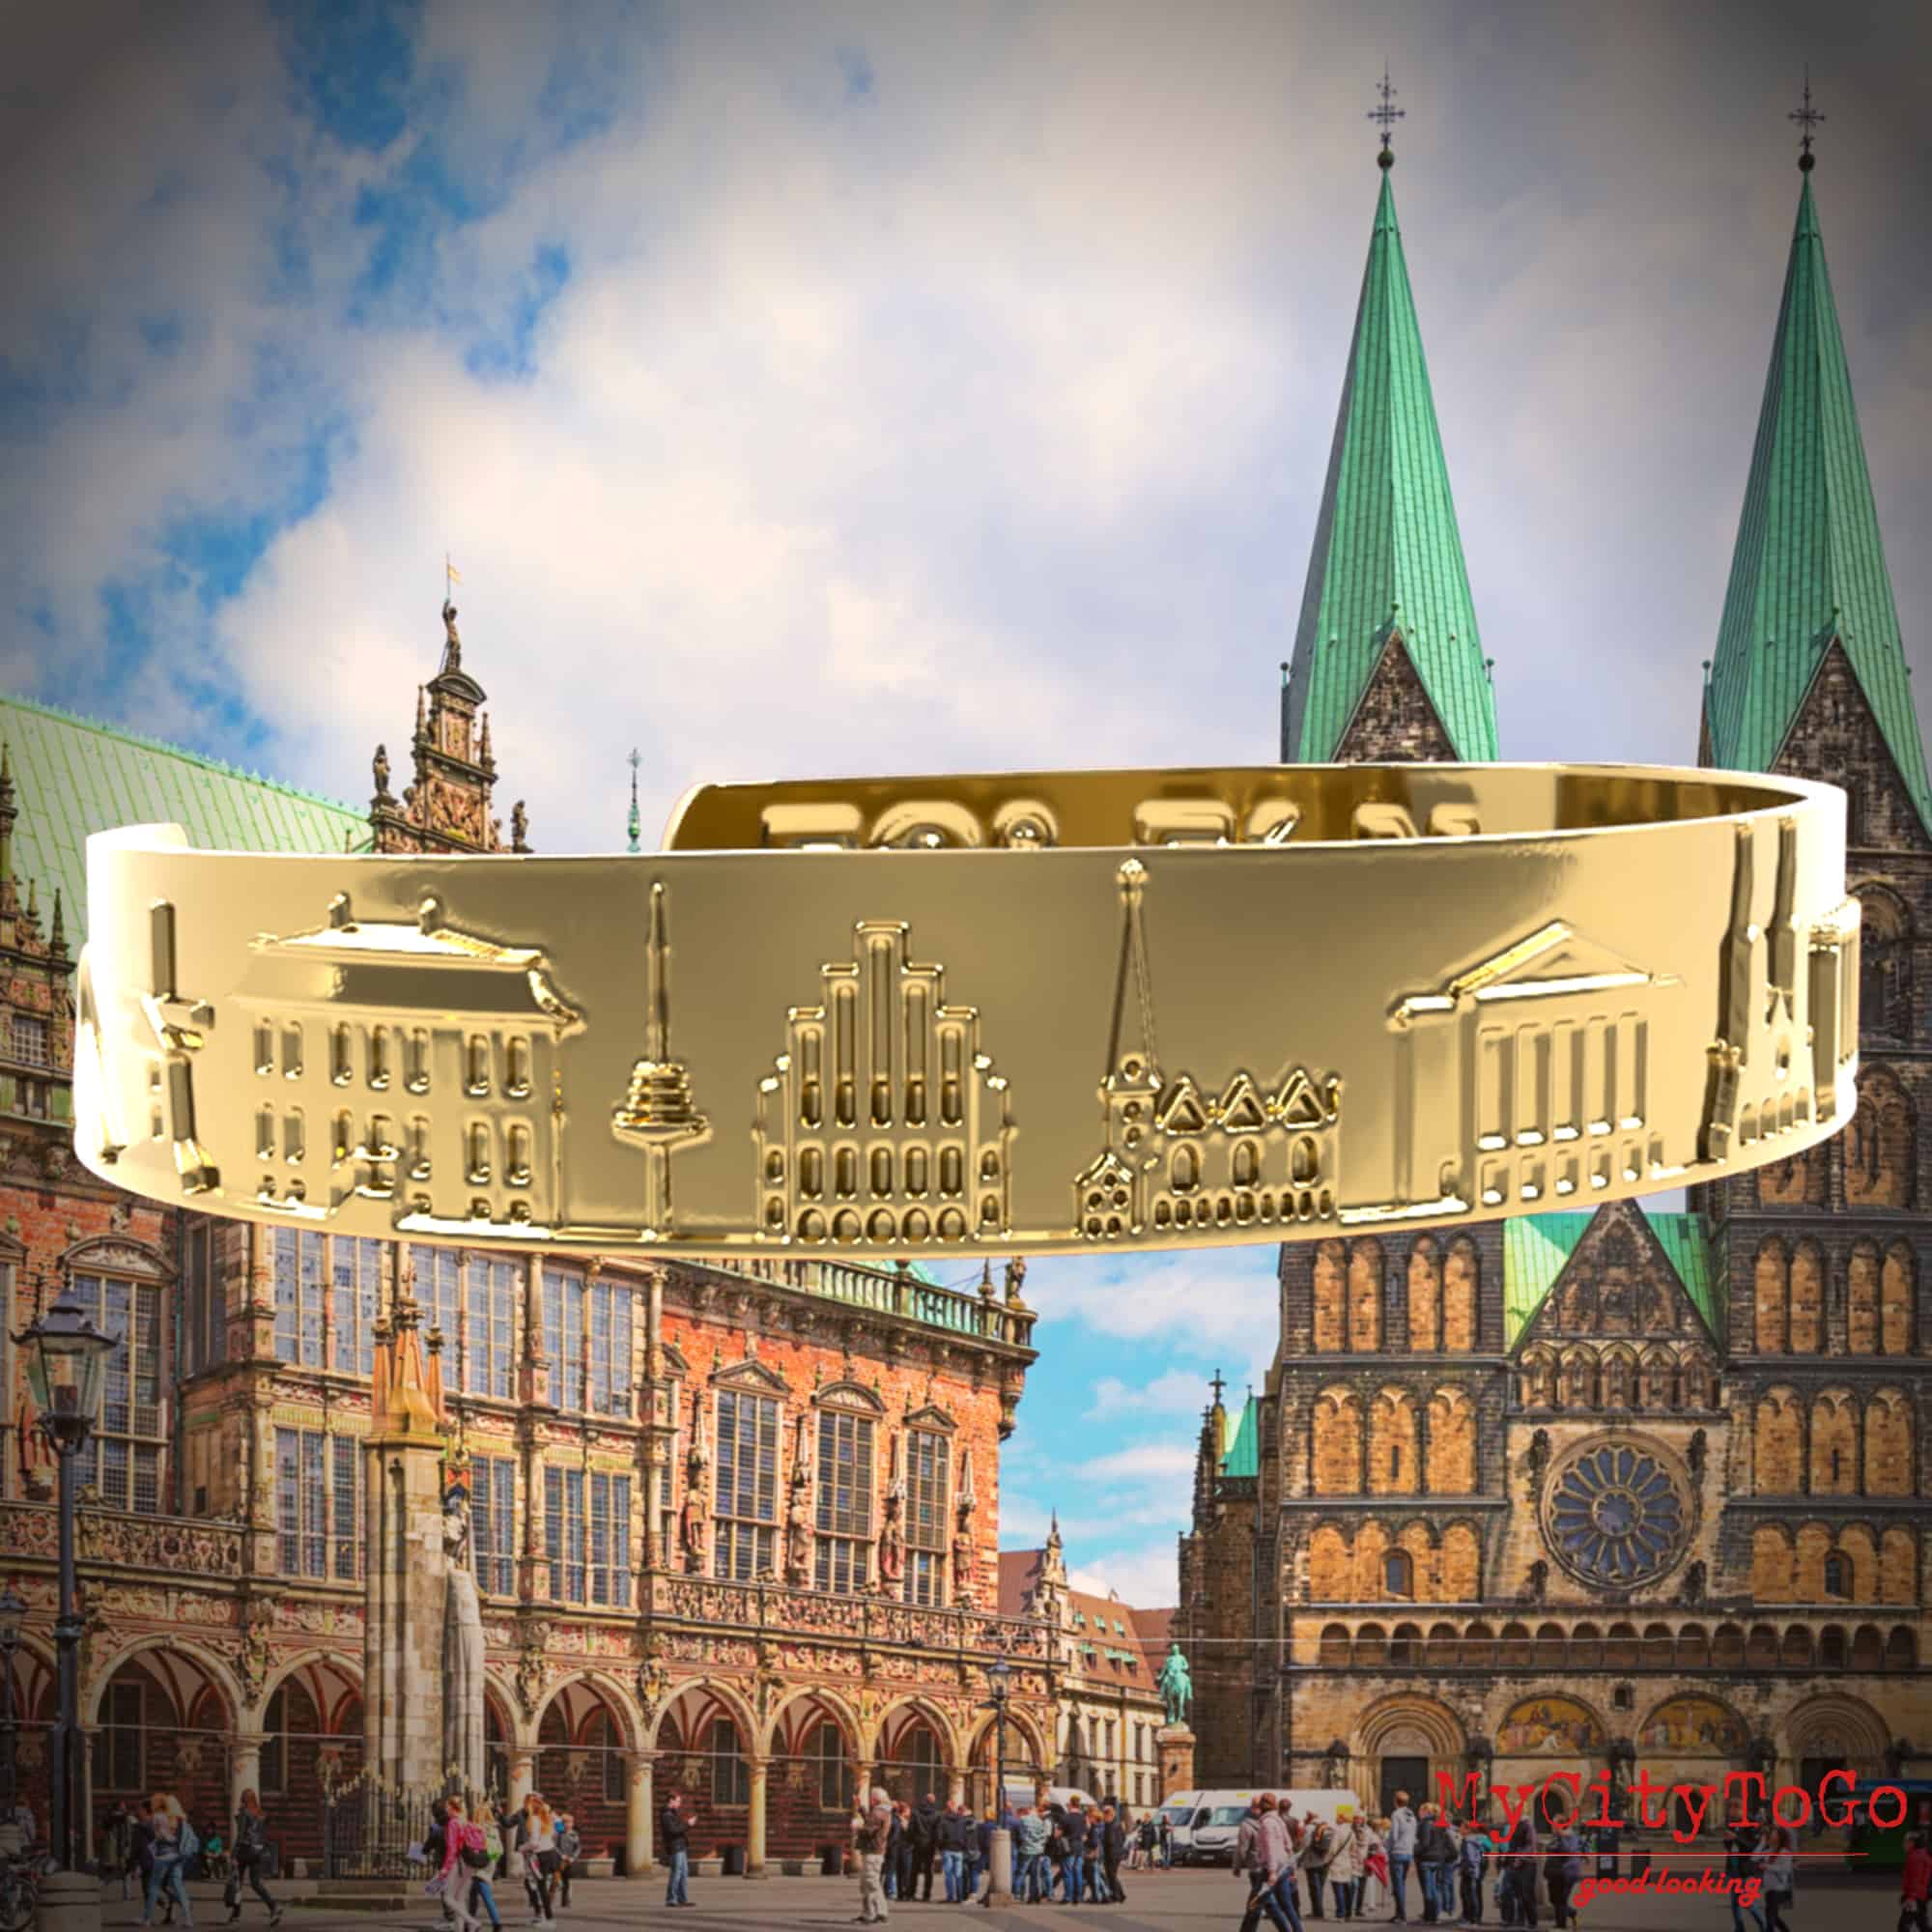 A golden bracelet from MyCityToGo with famous motifs and coordinates of the city of Bremen